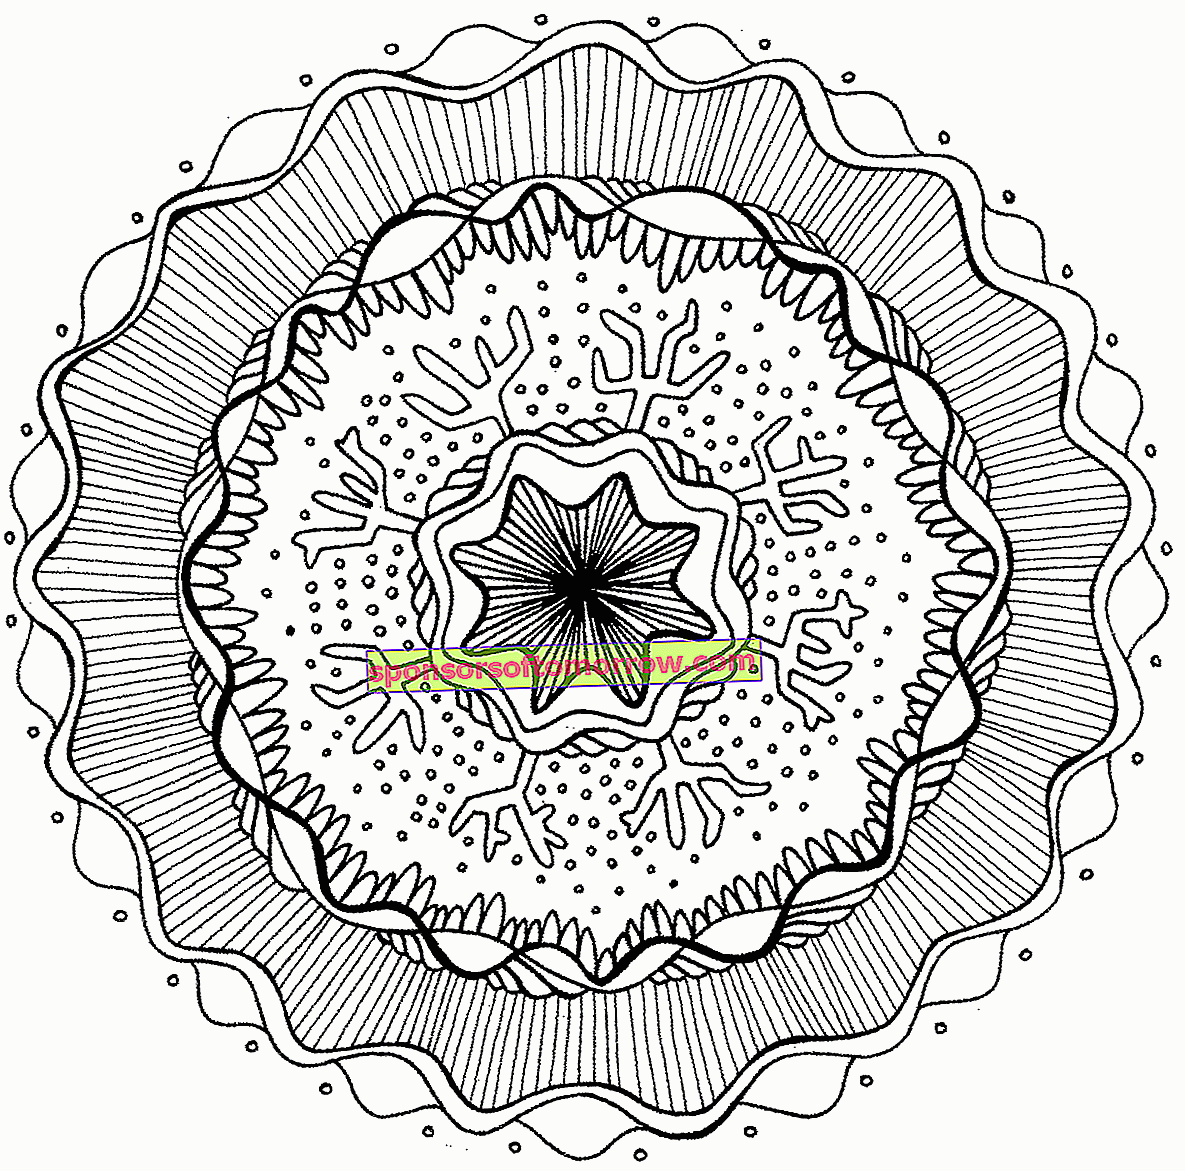 The best websites to download Mandalas for free